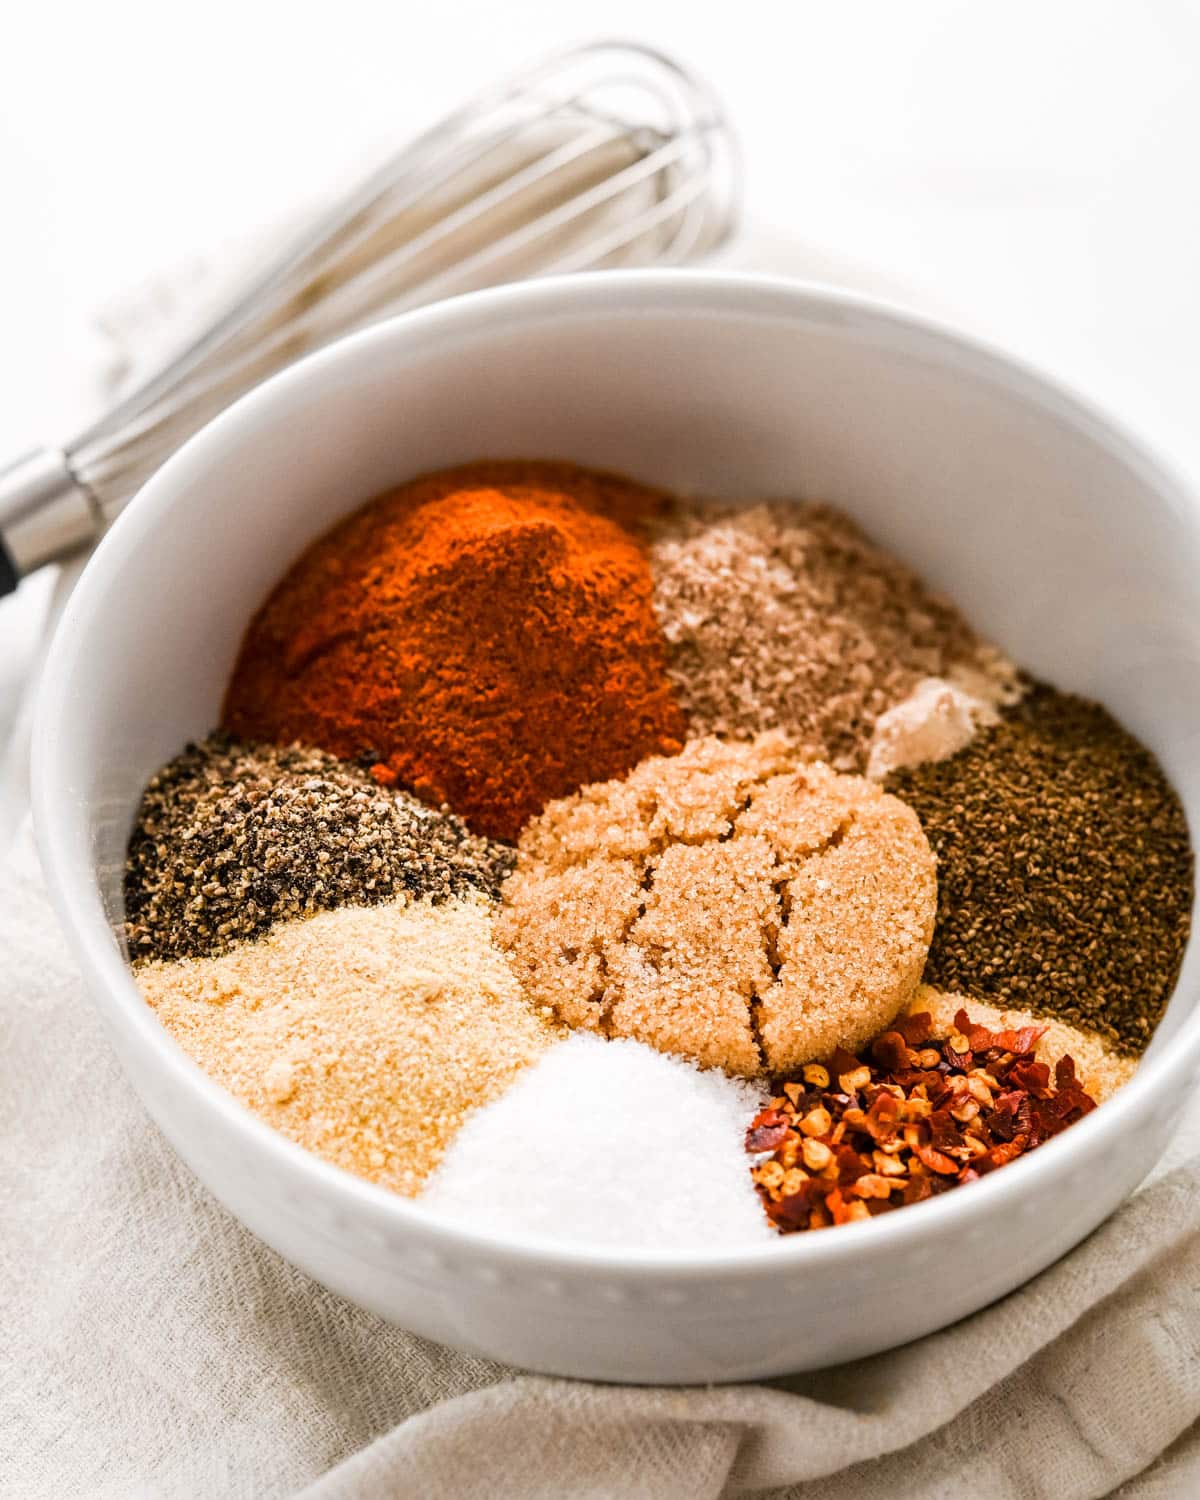 Combining the sugar, paprika, salt and spices in a bowl.